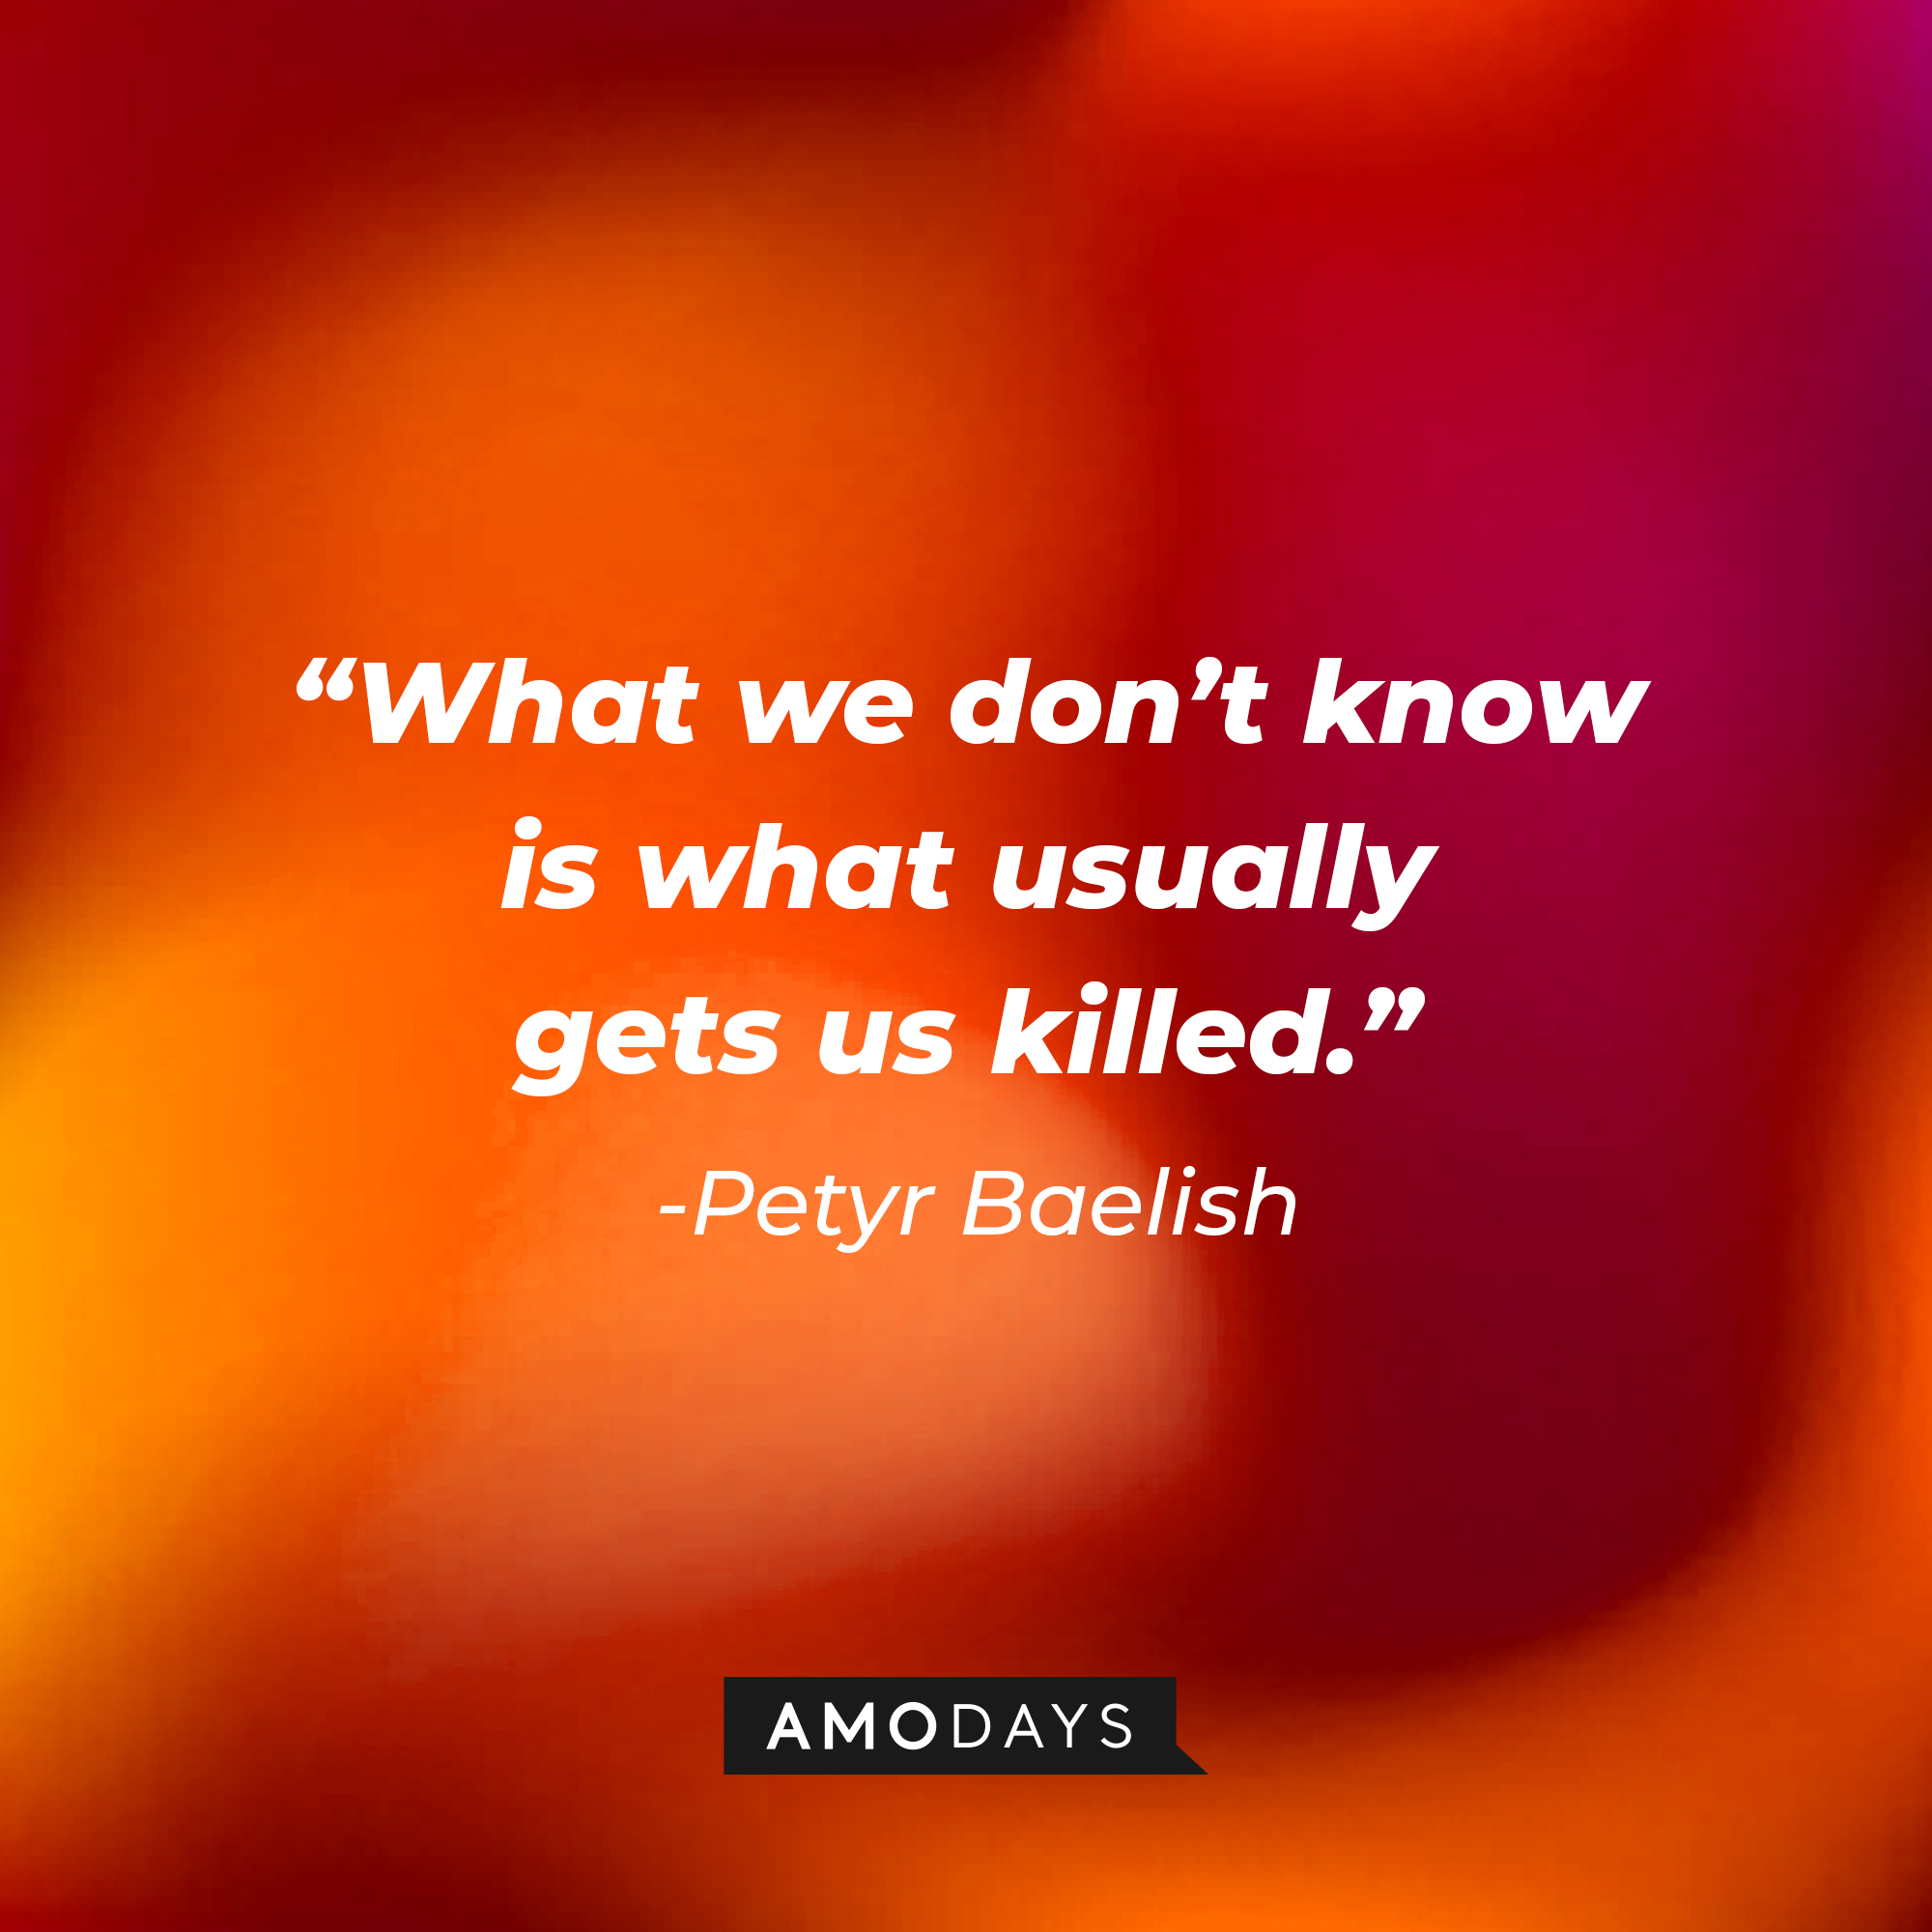 Petyr Baelish’s quote: “What we don’t know is what usually gets us killed.” | Source: AmoDays